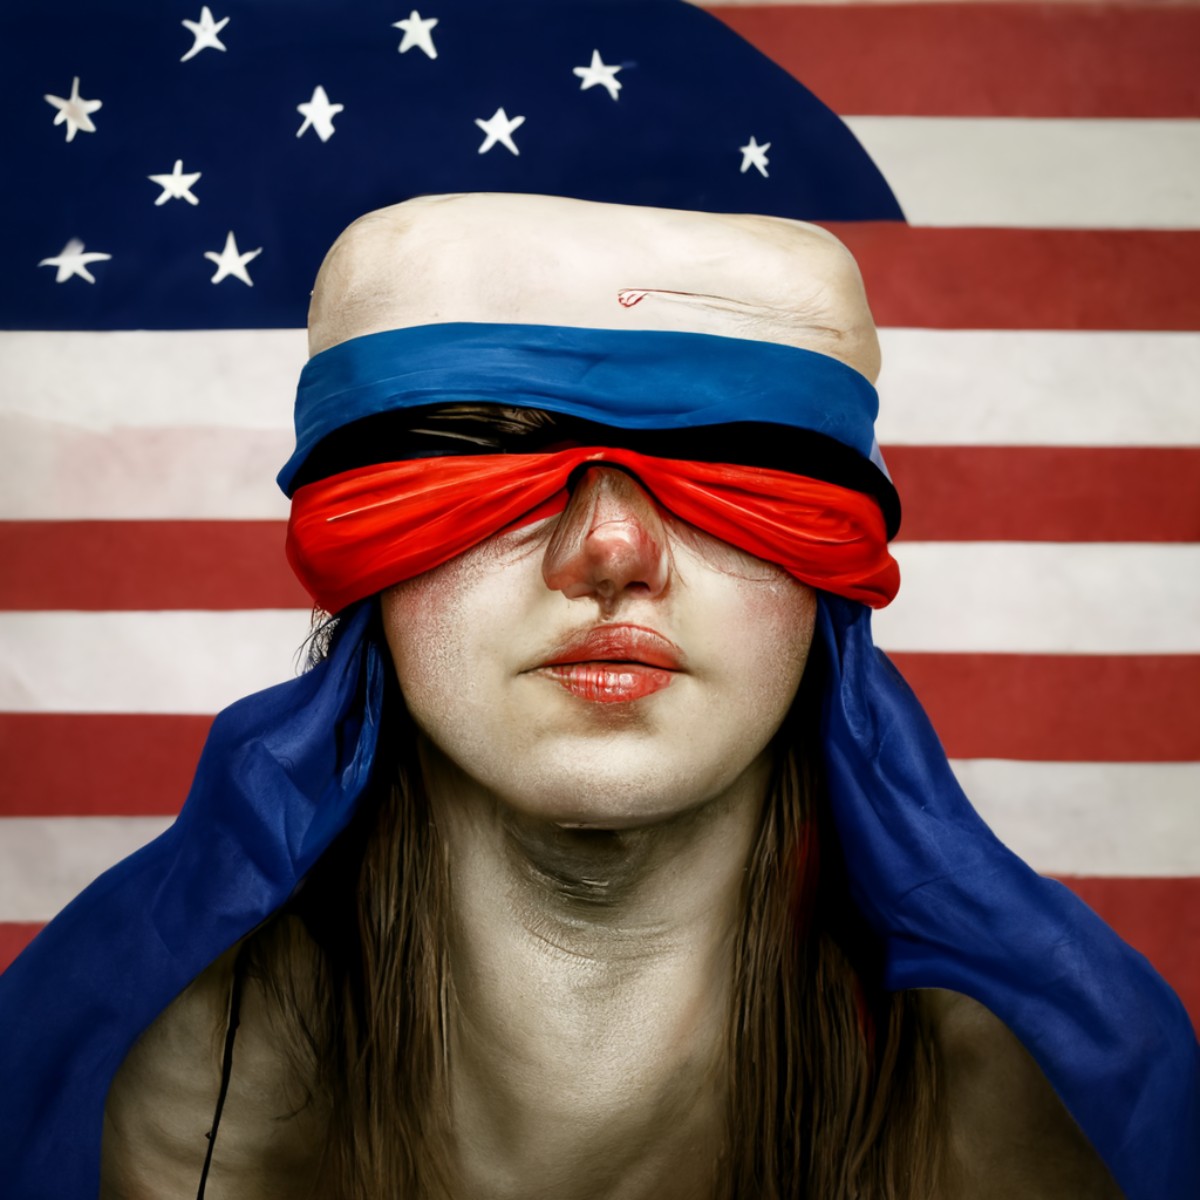 Blindfolded person, set against the background of the American flag